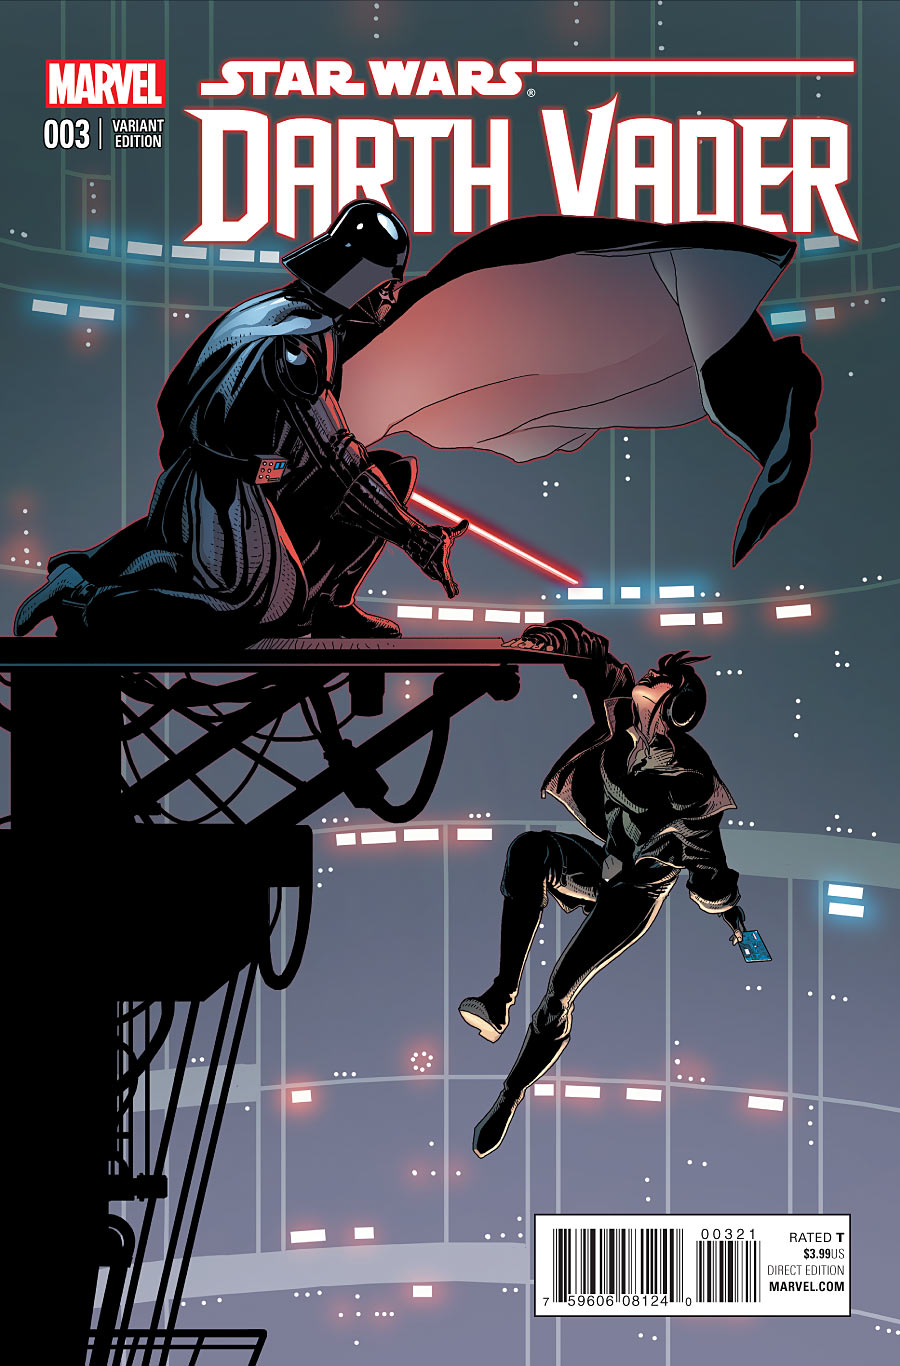 Darth Vader Issue #3 Review